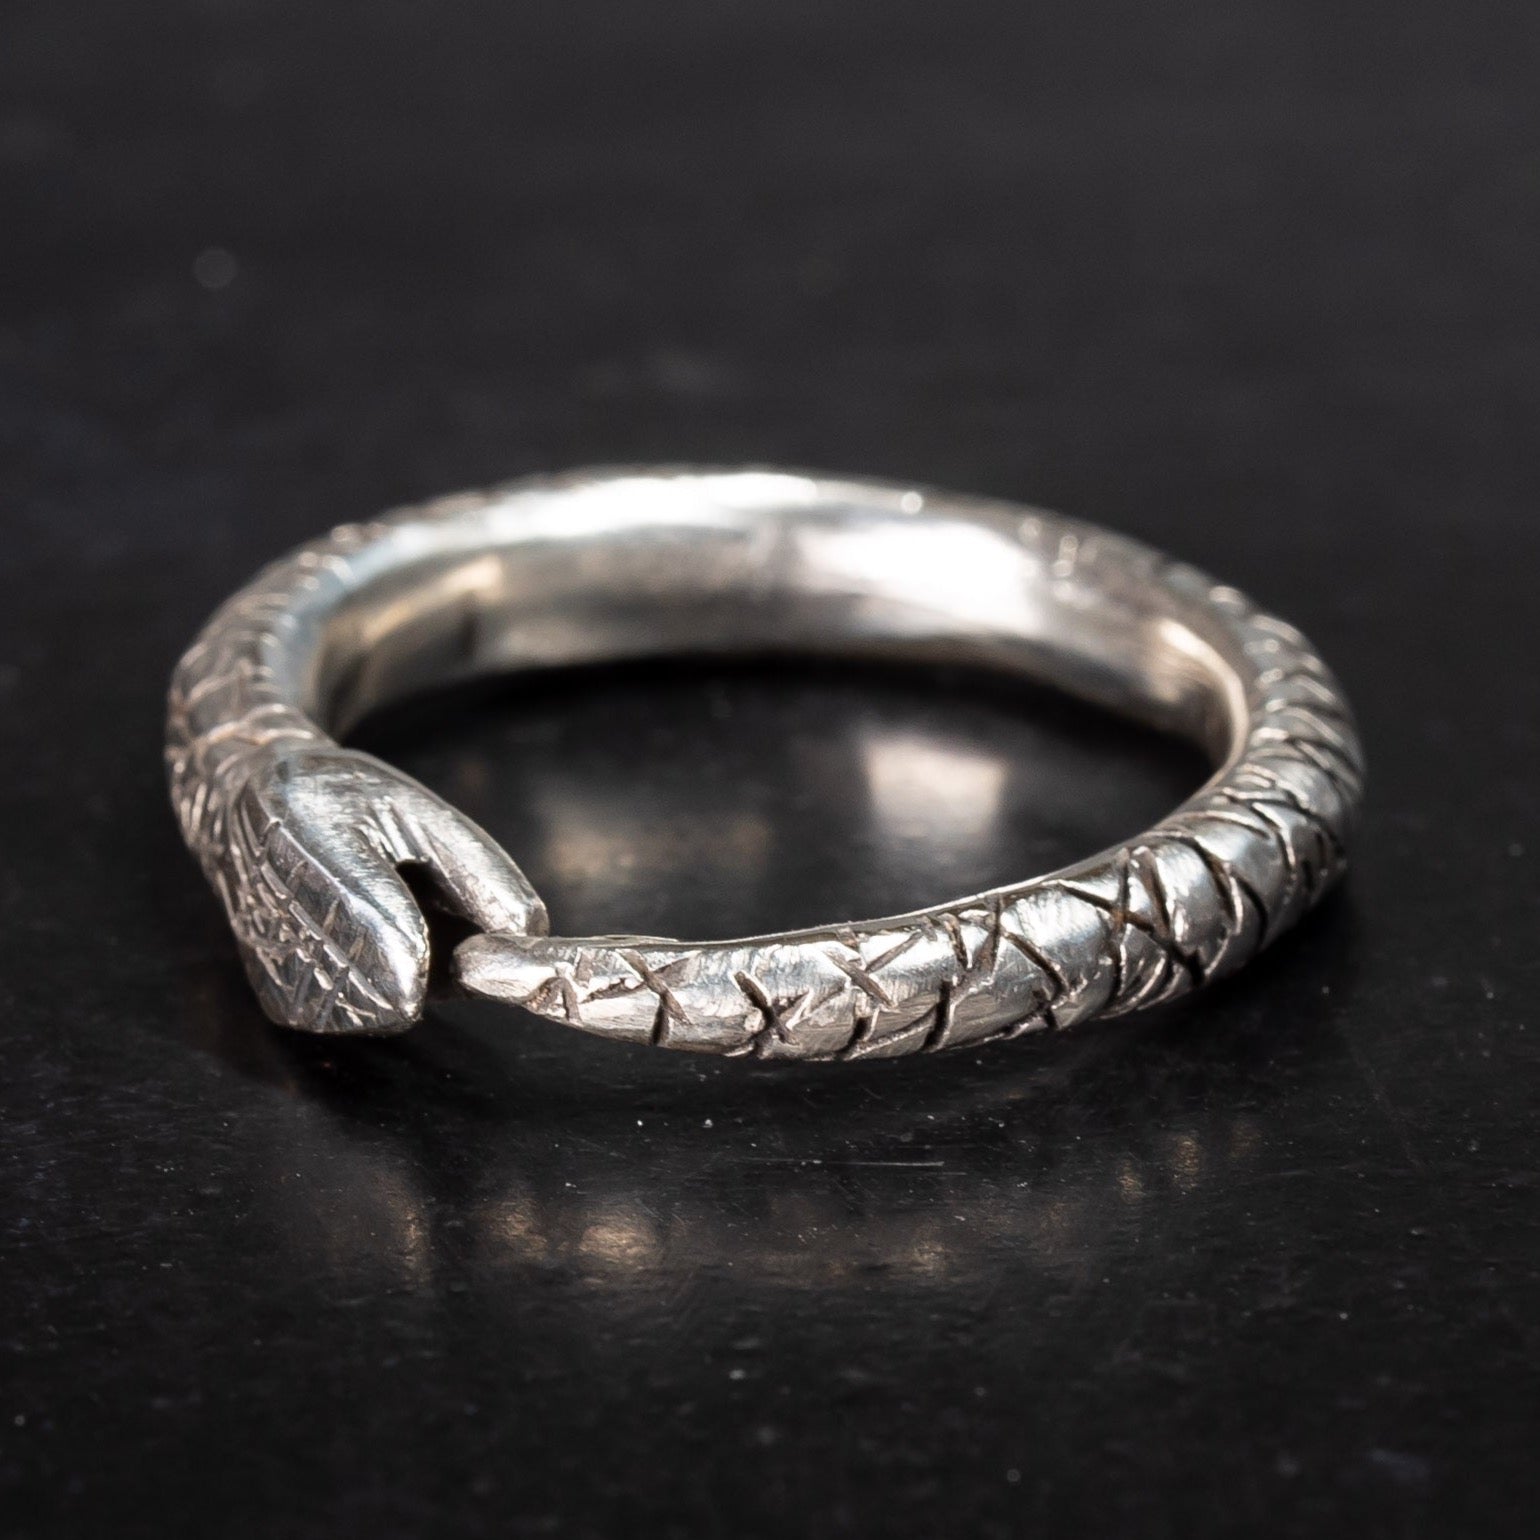 mens sterling silver snake ring, ouroboros snake eating its own tail on black background